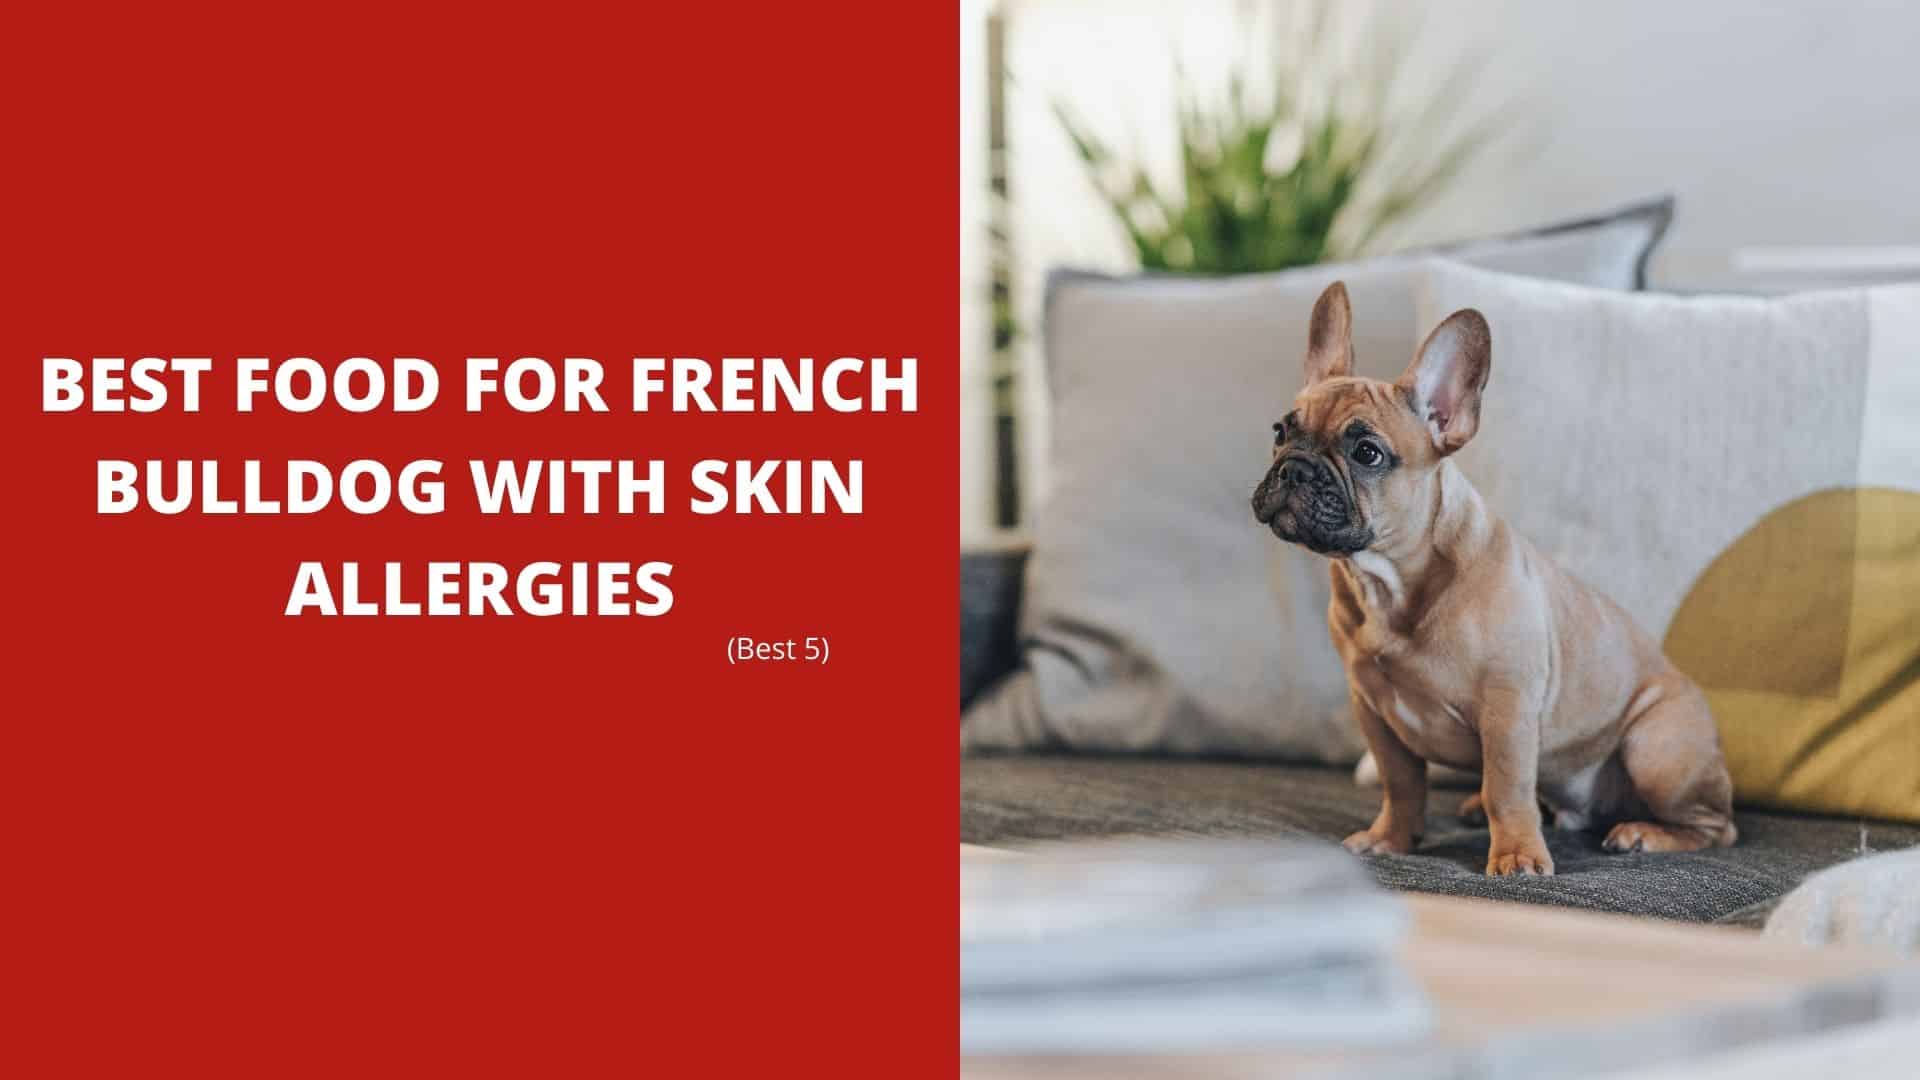 5 Best Food For French Bulldog With Skin Allergies